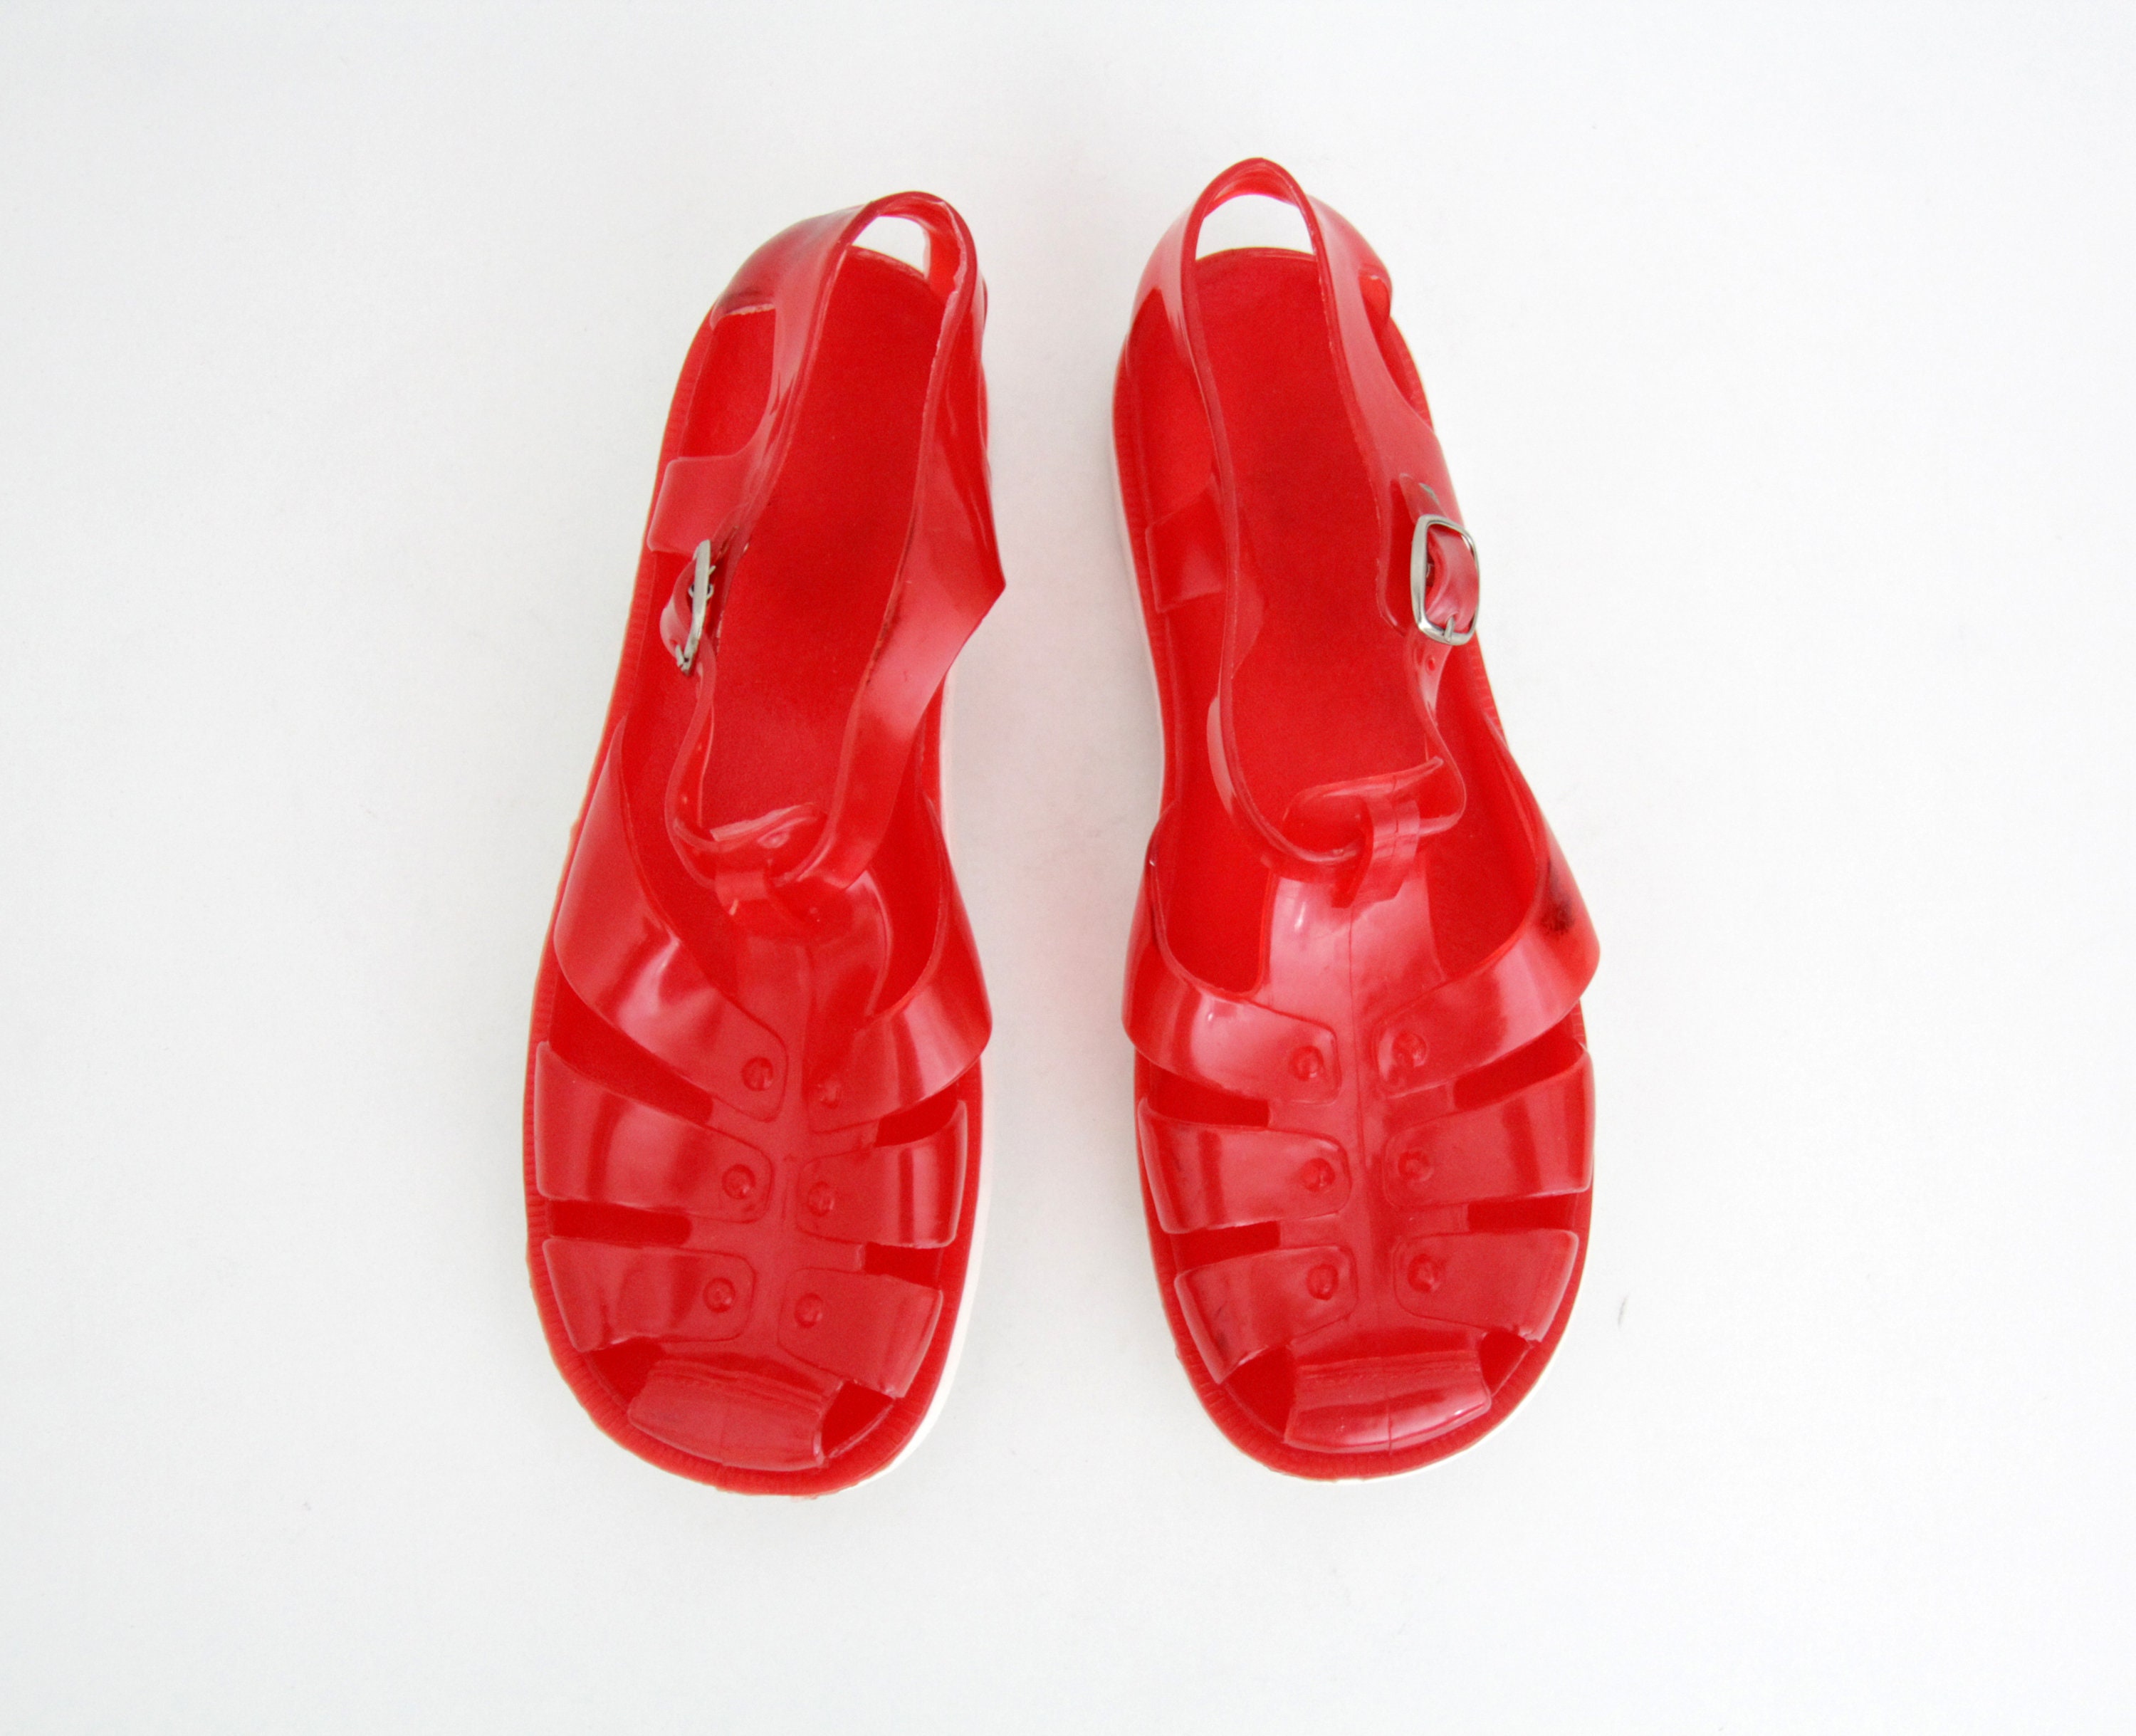 Buy 80s Jelly Sandals Online In India -  India